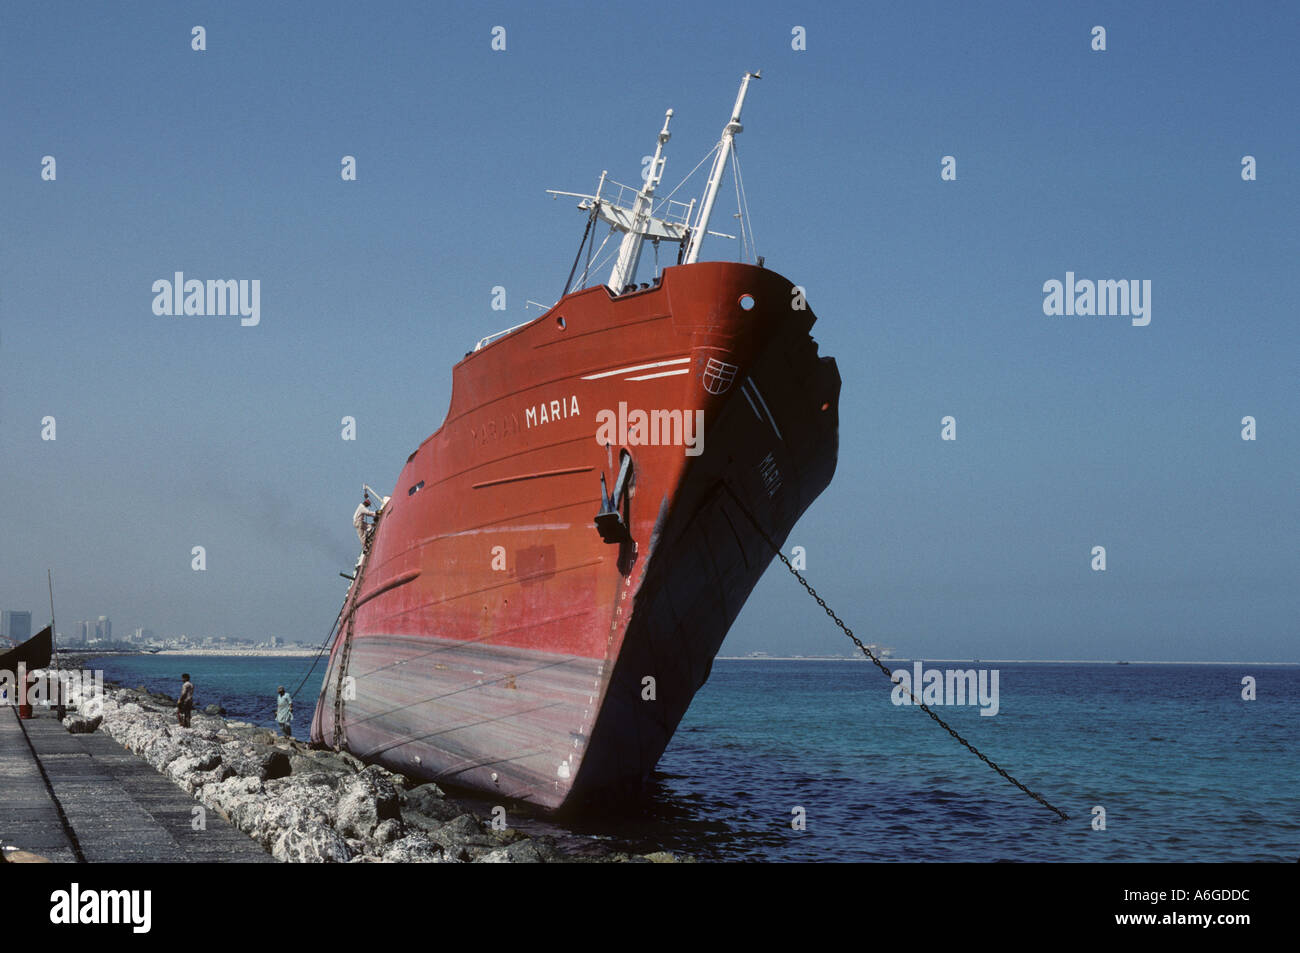 Vessel Maria blown aground when the anchor dragged in a storm Hamrya harbour Dubai United Arab Emirates Stock Photo